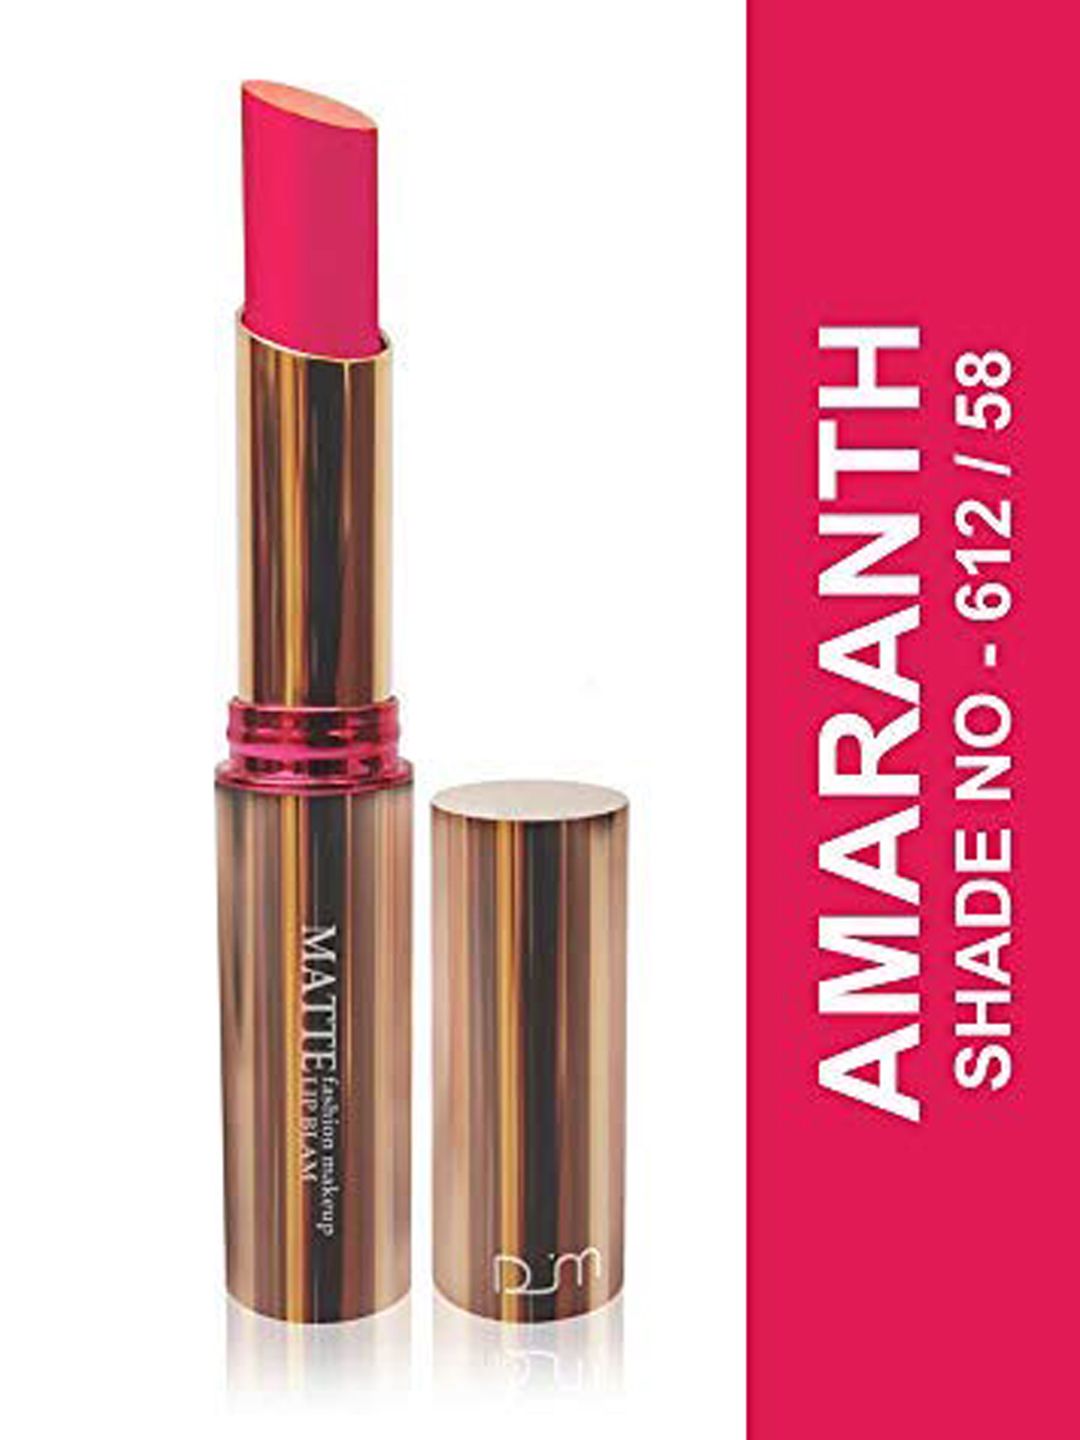 Seven Seas Matte With You Paraben Free Lipstick : Amaranth 612/58 Price in India